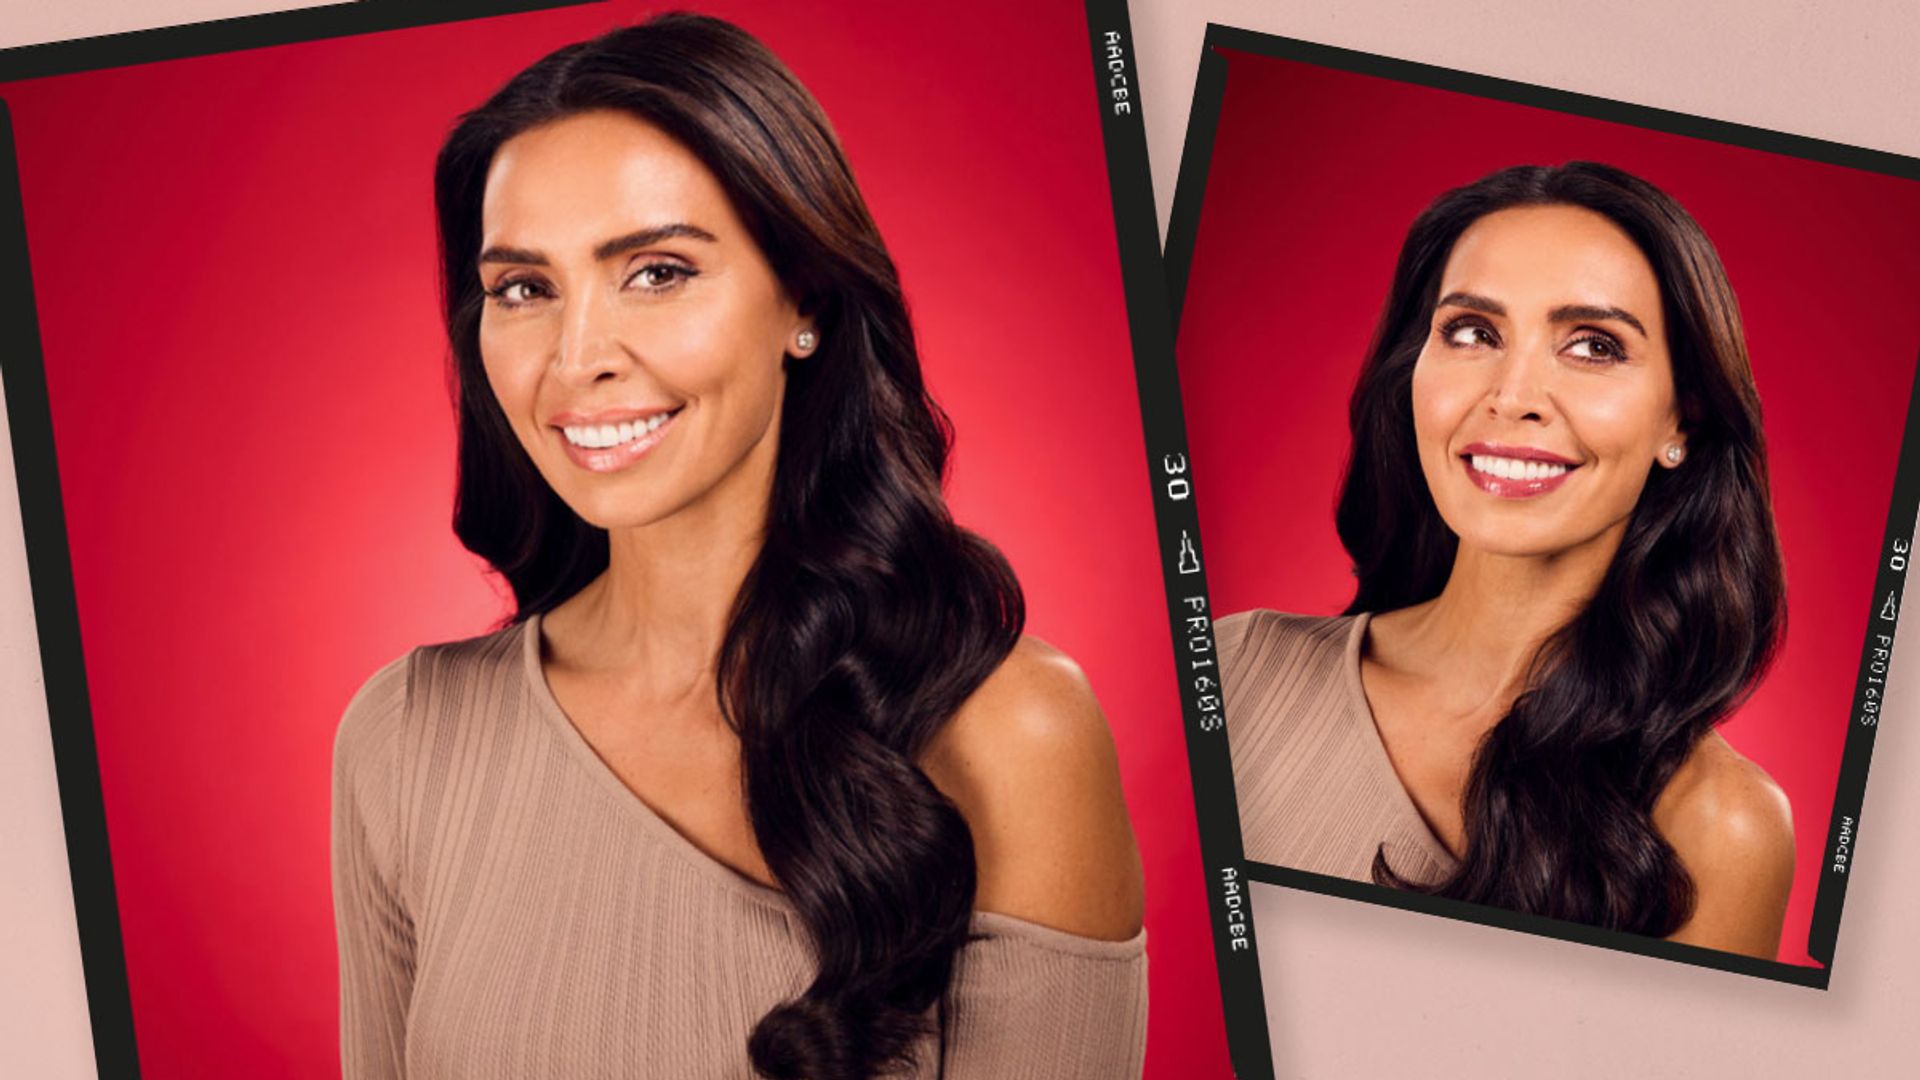 Exclusive: Christine Lampard shares how to wow with makeup this party season